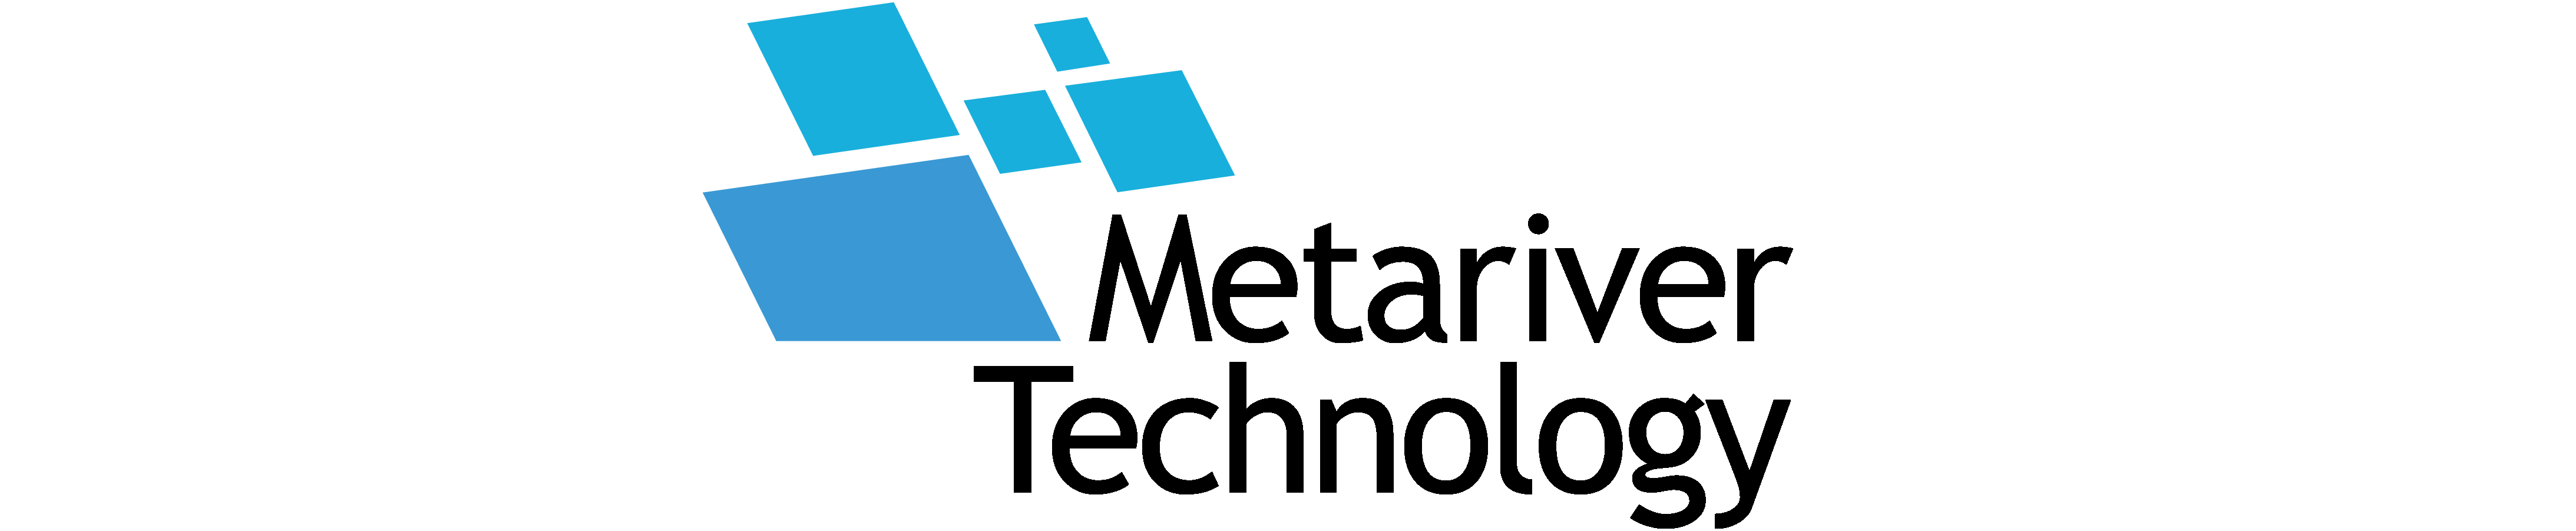 Metariver Technology 4.png